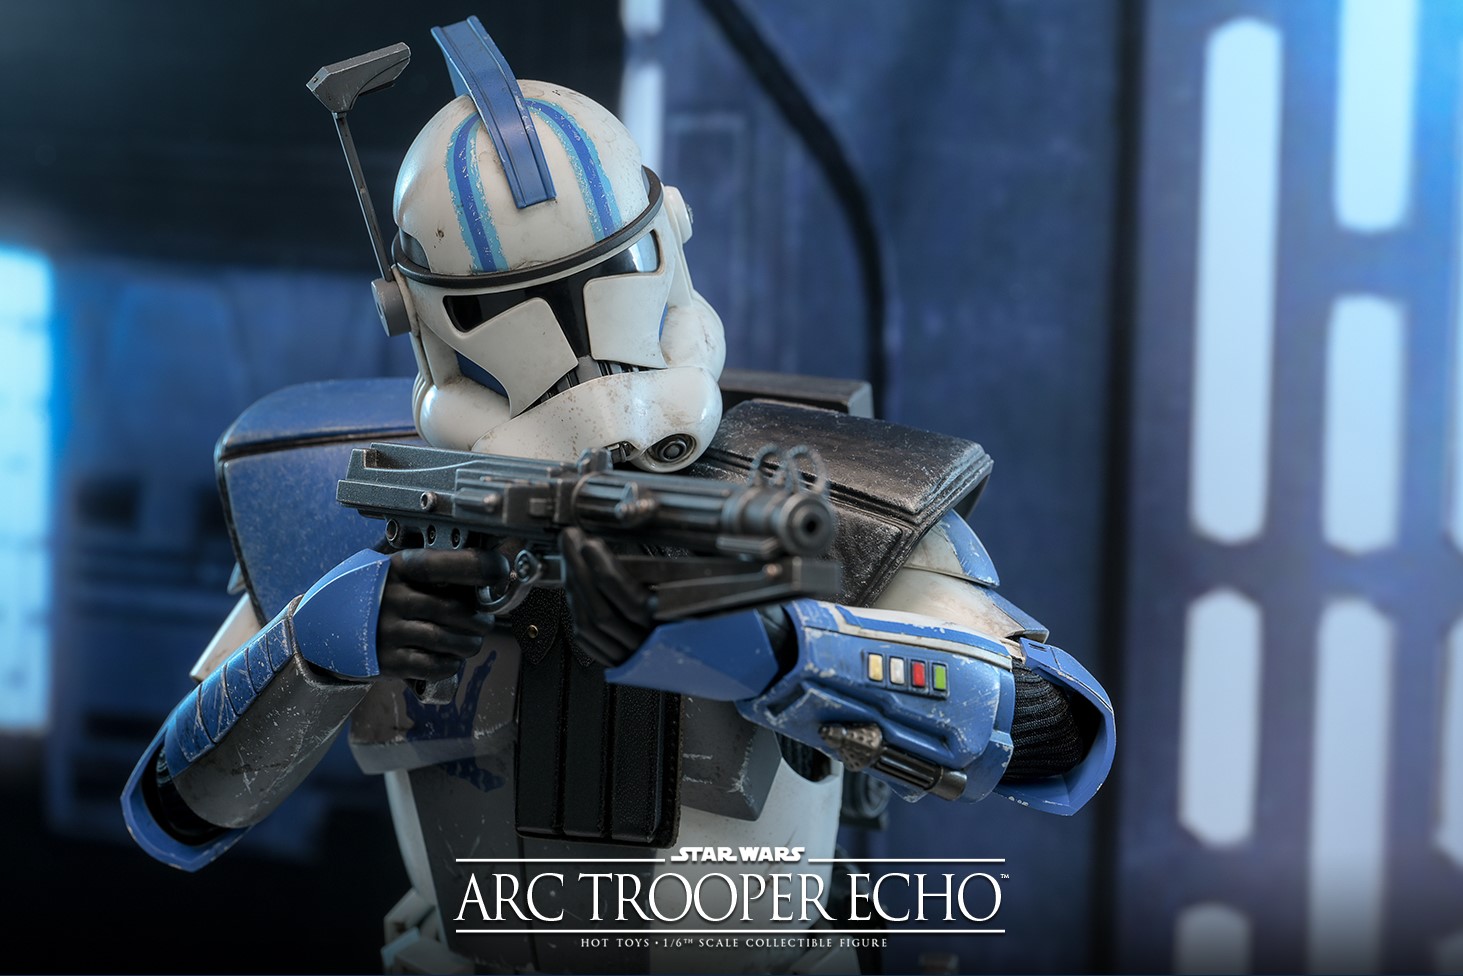 Star Wars: The Clone Wars – Arc Trooper Echo by Hot Toys